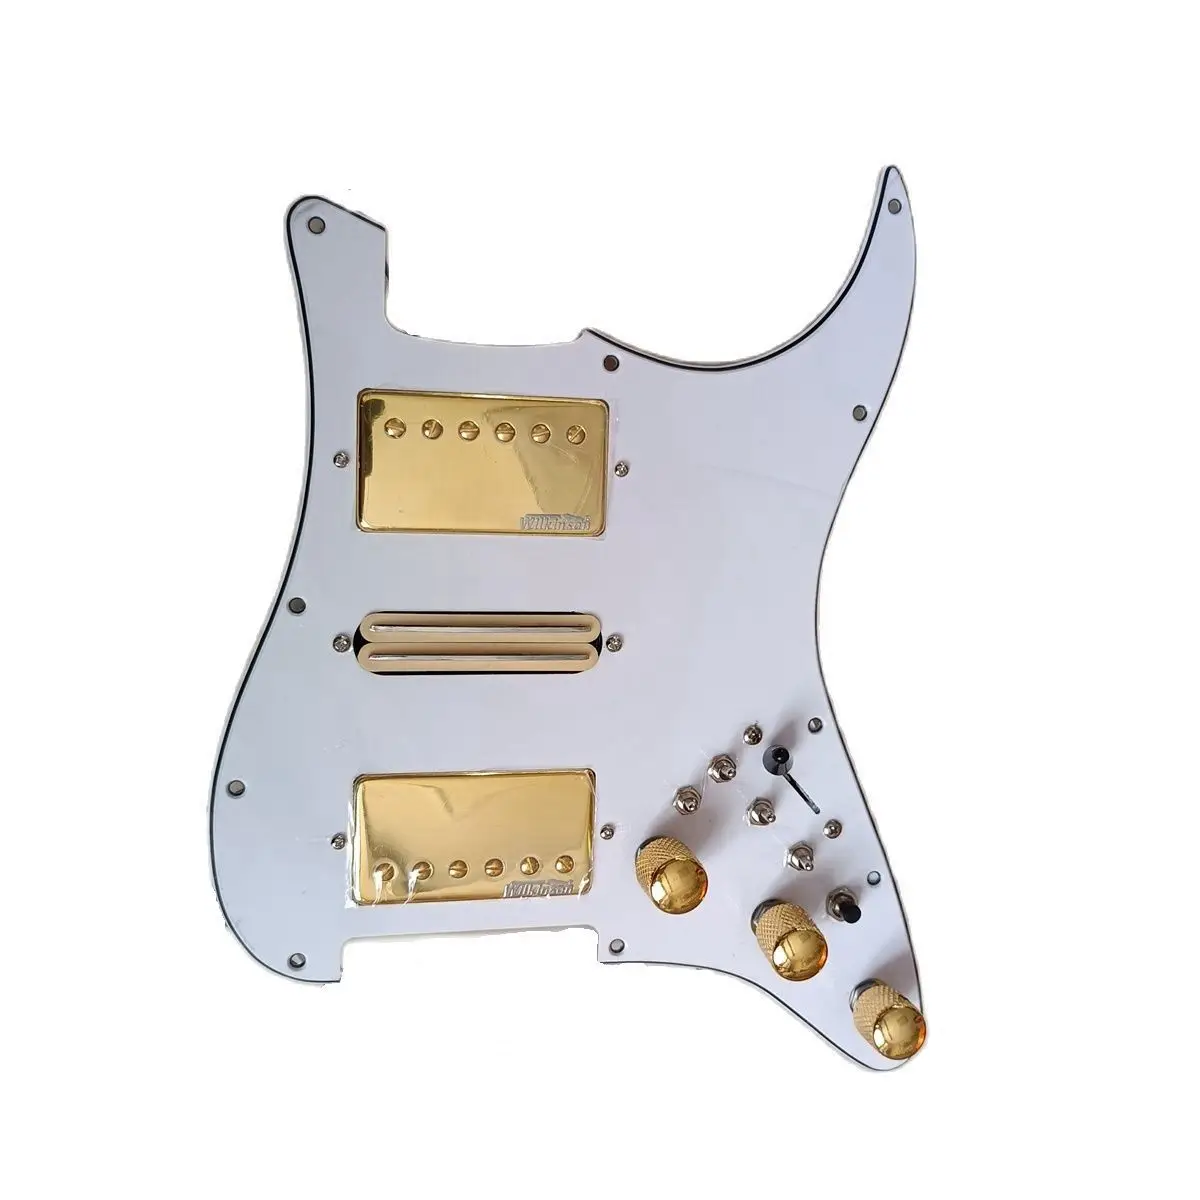 

YUMIAY HSH Prewired Pickguard Set Multifunction Switch Gold Wilkinson Alnico5 Pickups High Output DCR Fit For Fender Guitar